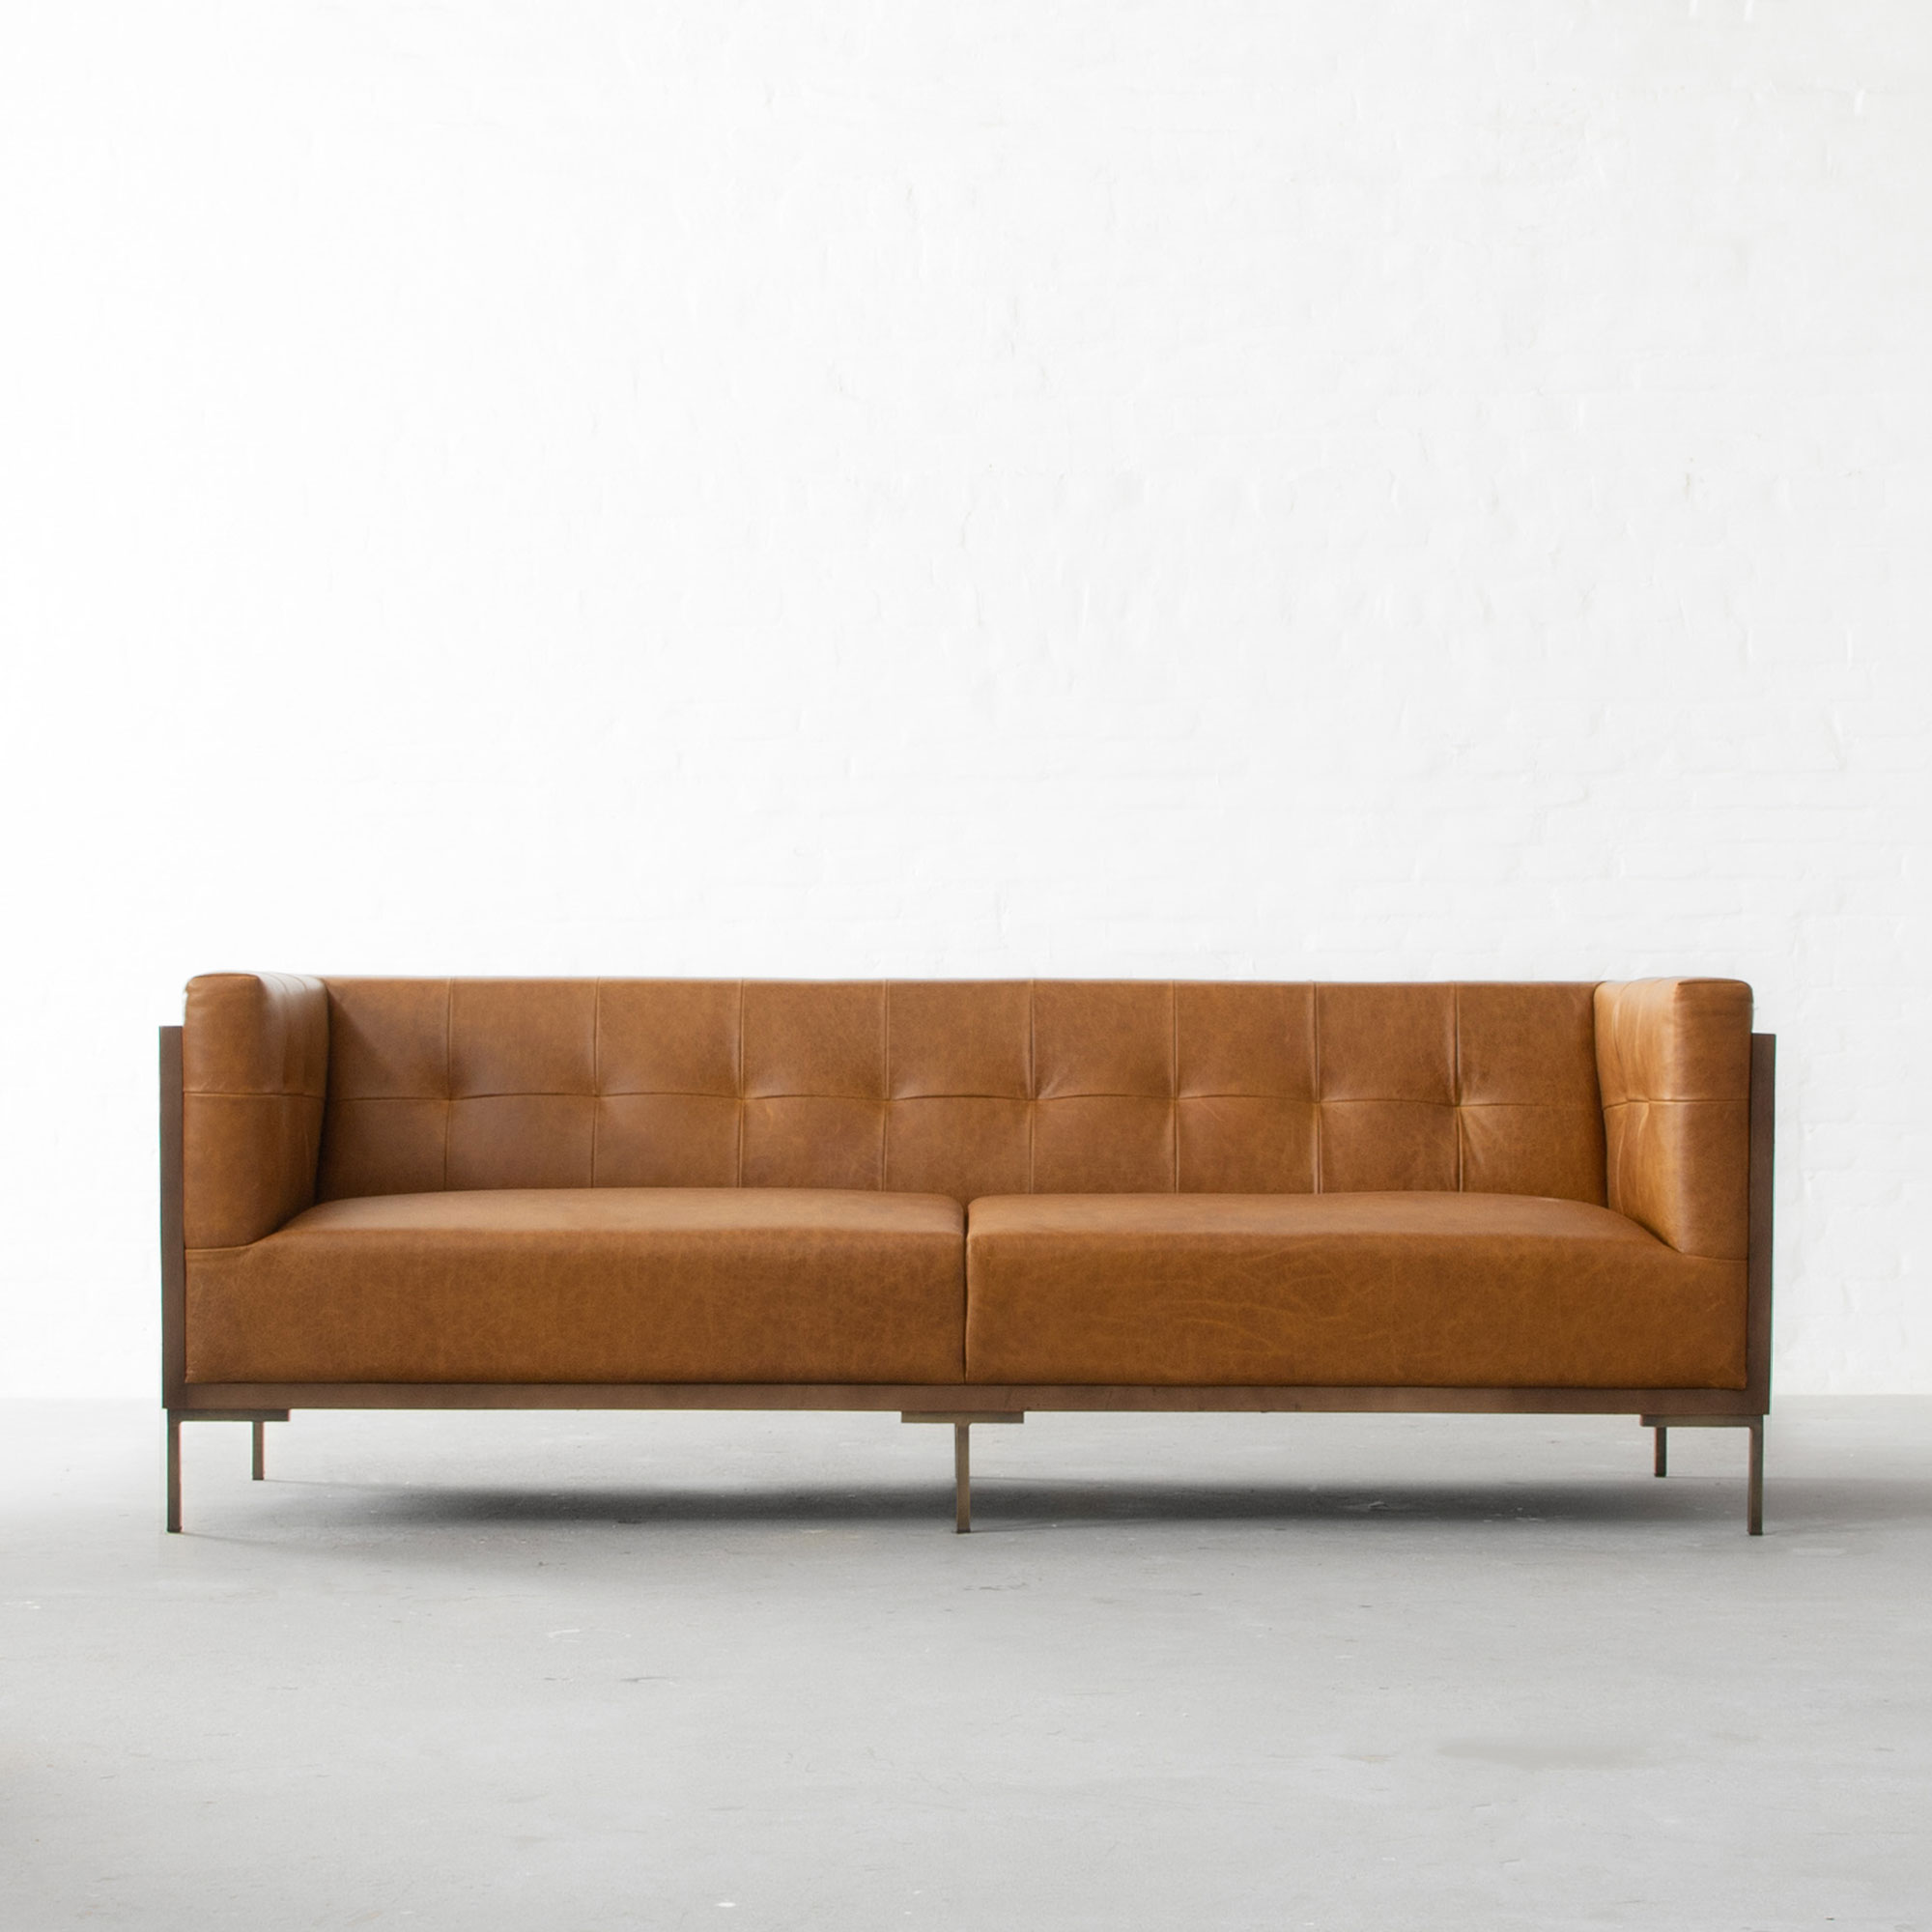 New York Leather Sofa Collection, New Leather Sofa